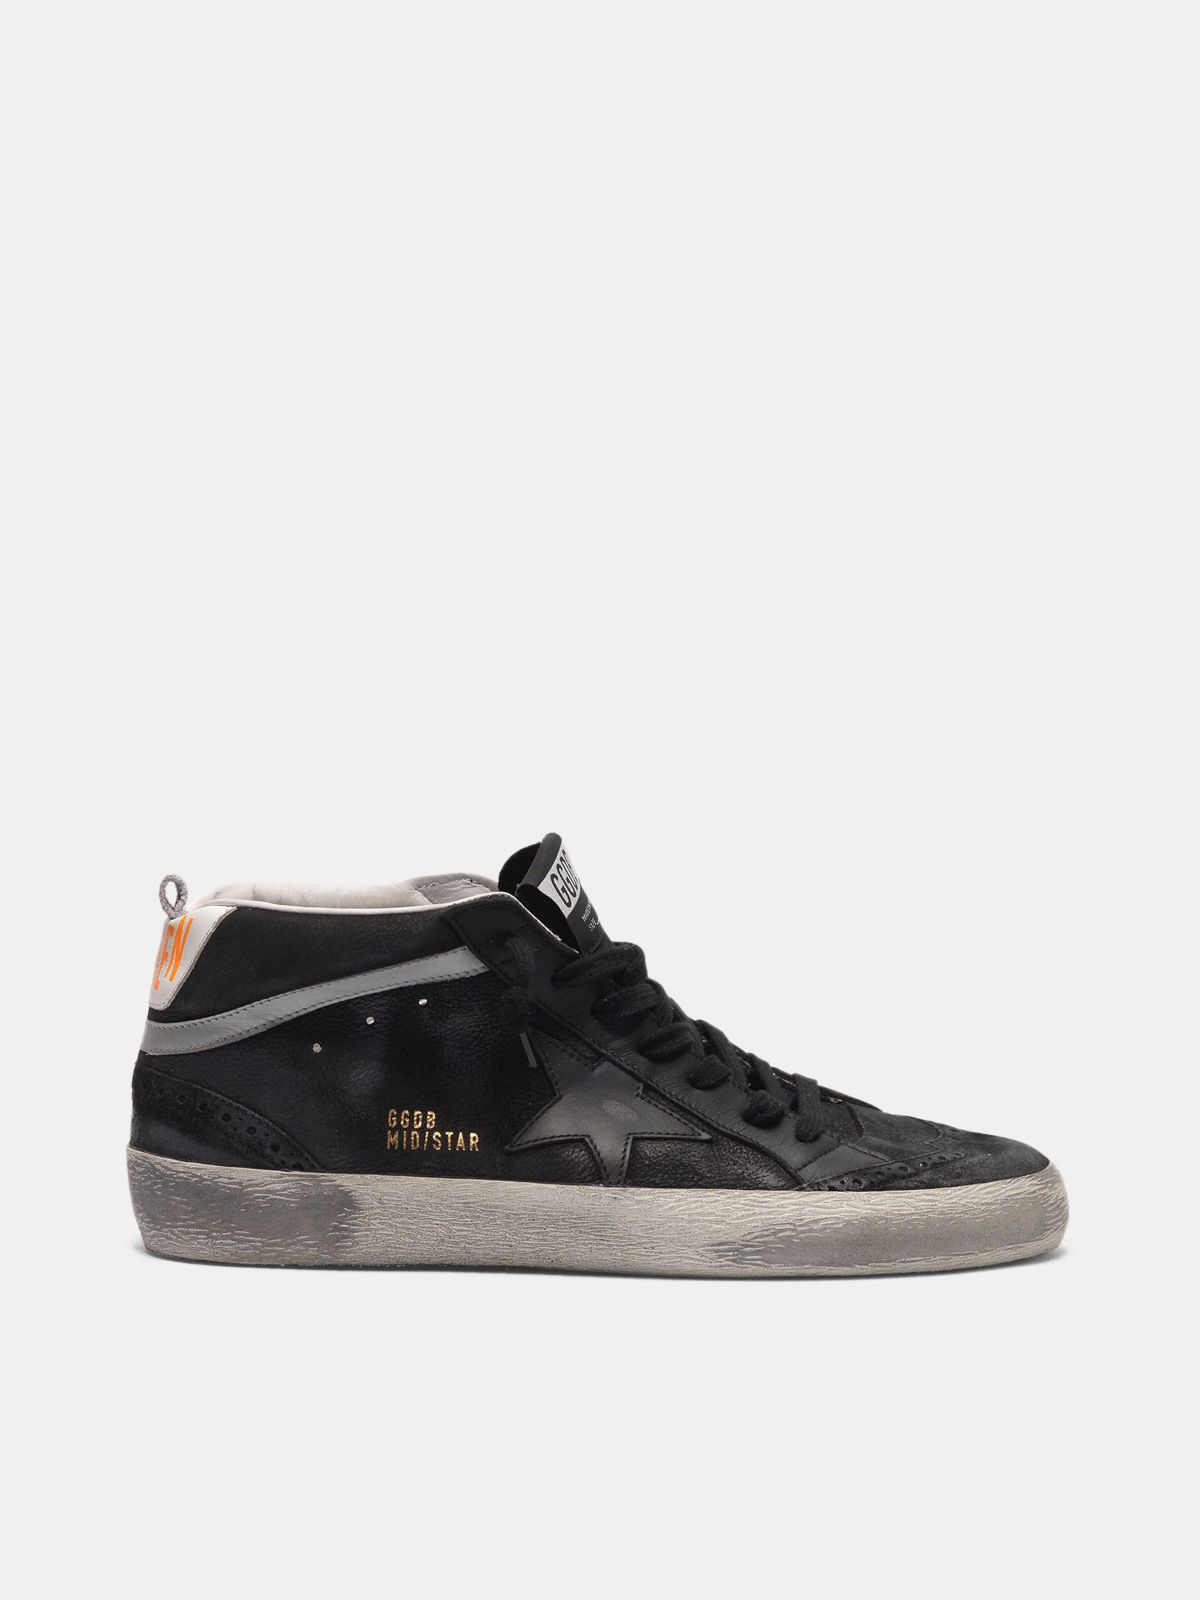 Golden Goose Sconto Uomo Mid Star sneakers in leather with nubuck inserts